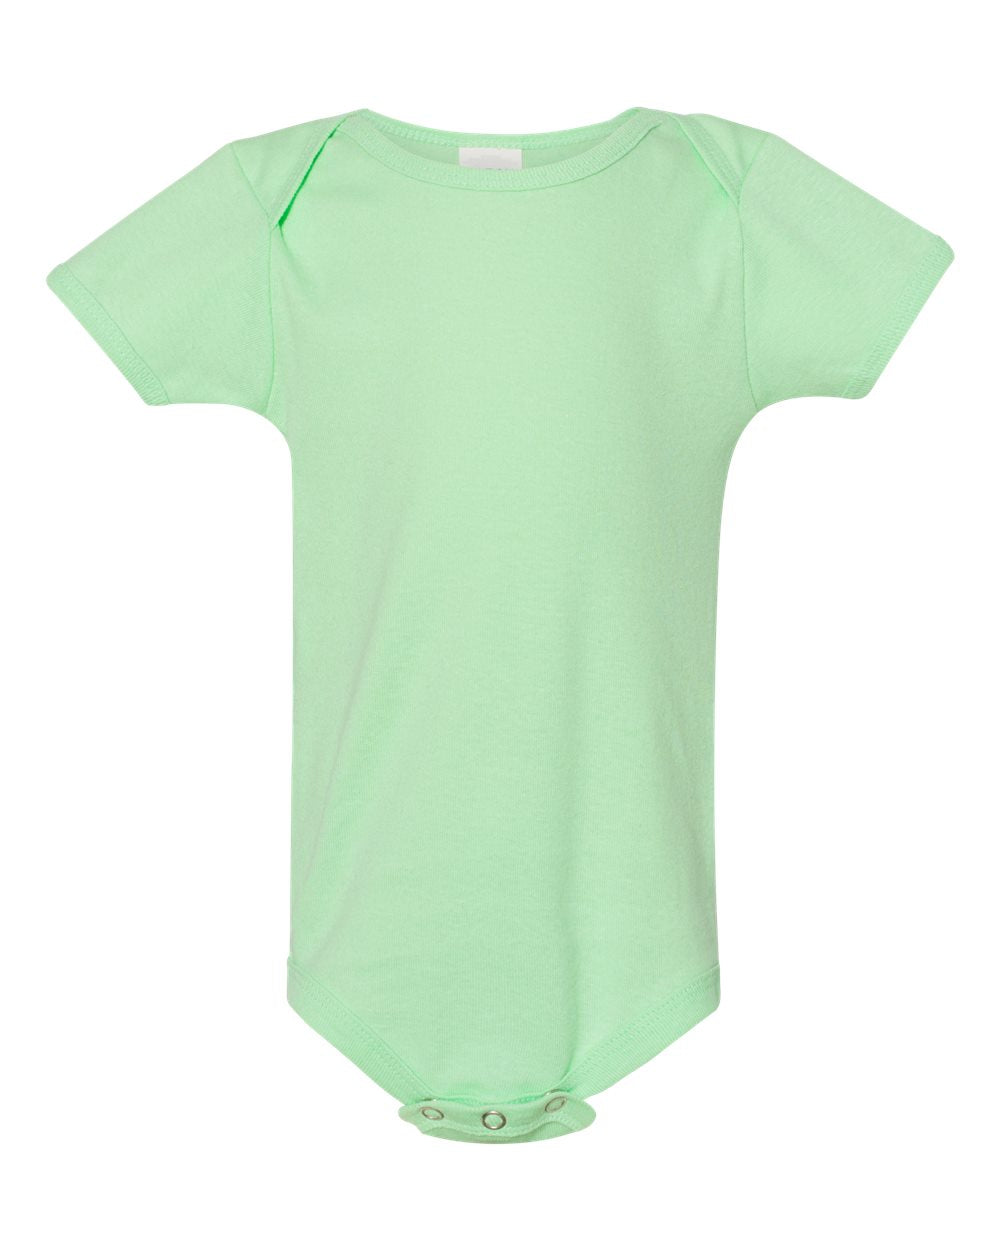 Baby Infant One Piece Onsie